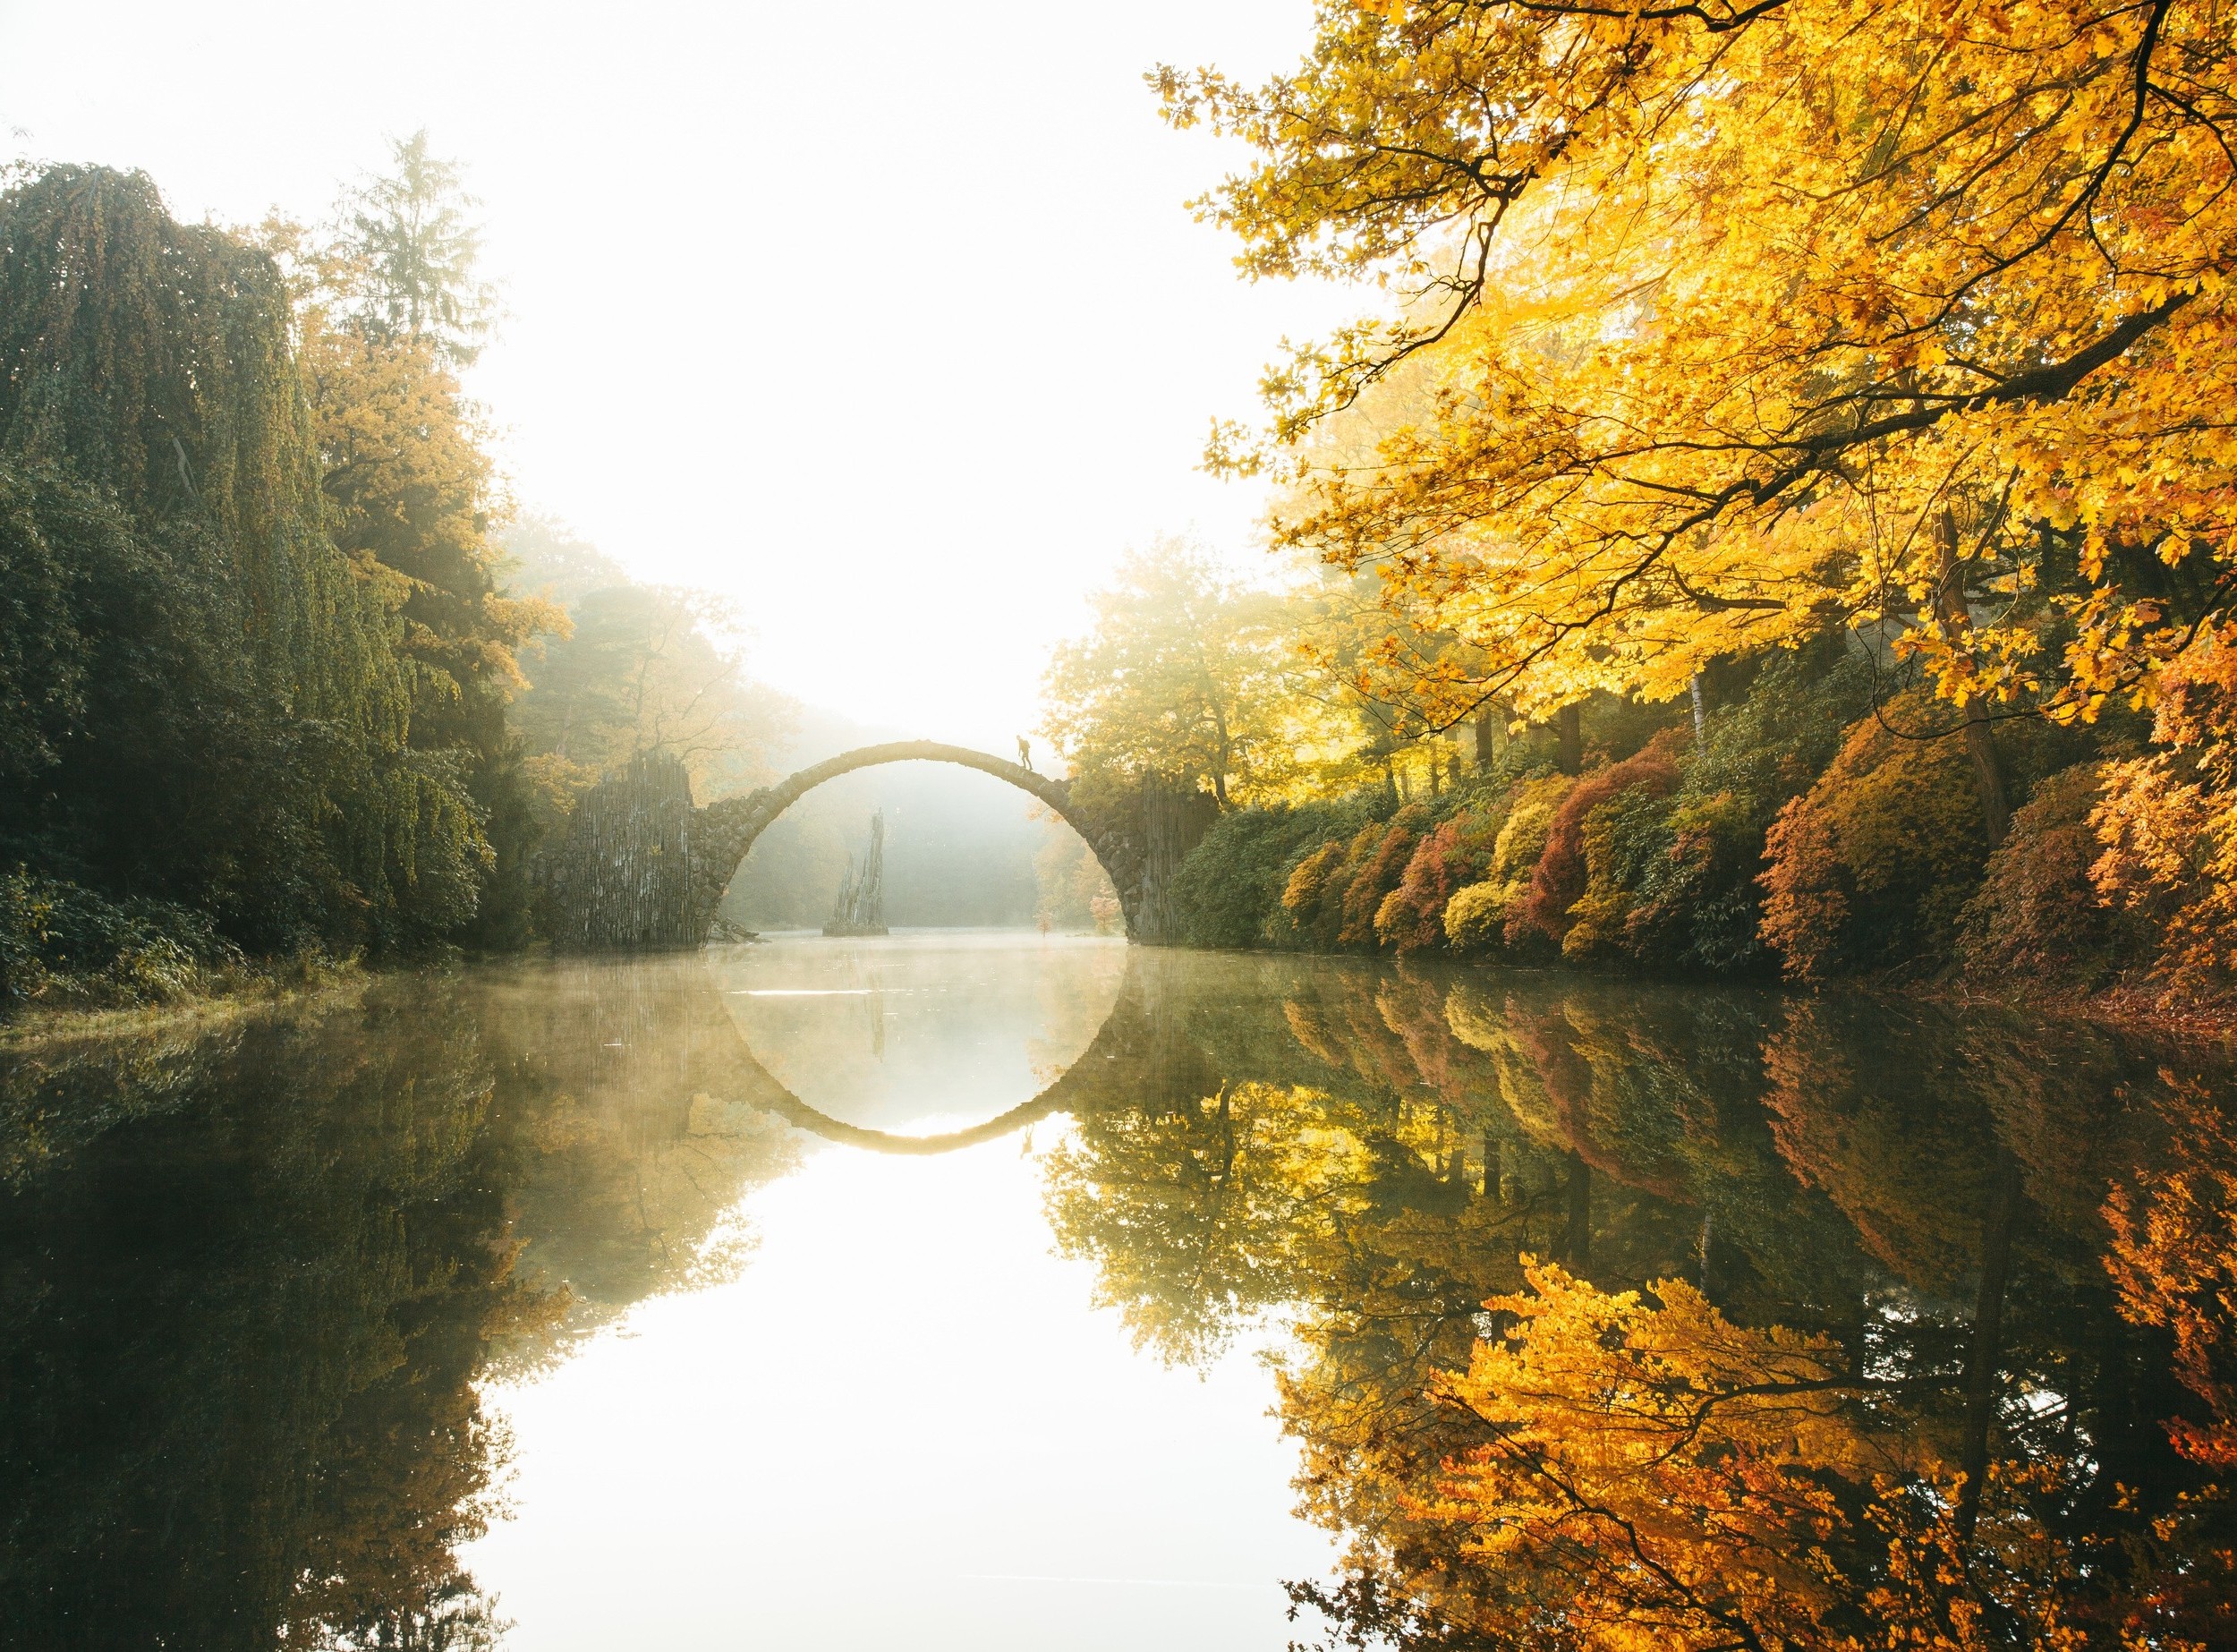 nature, Photography, Landscape, Fall, Morning, Sunlight, Trees, River, Reflection, Bridge, Yellow, Leaves, Germany Wallpaper